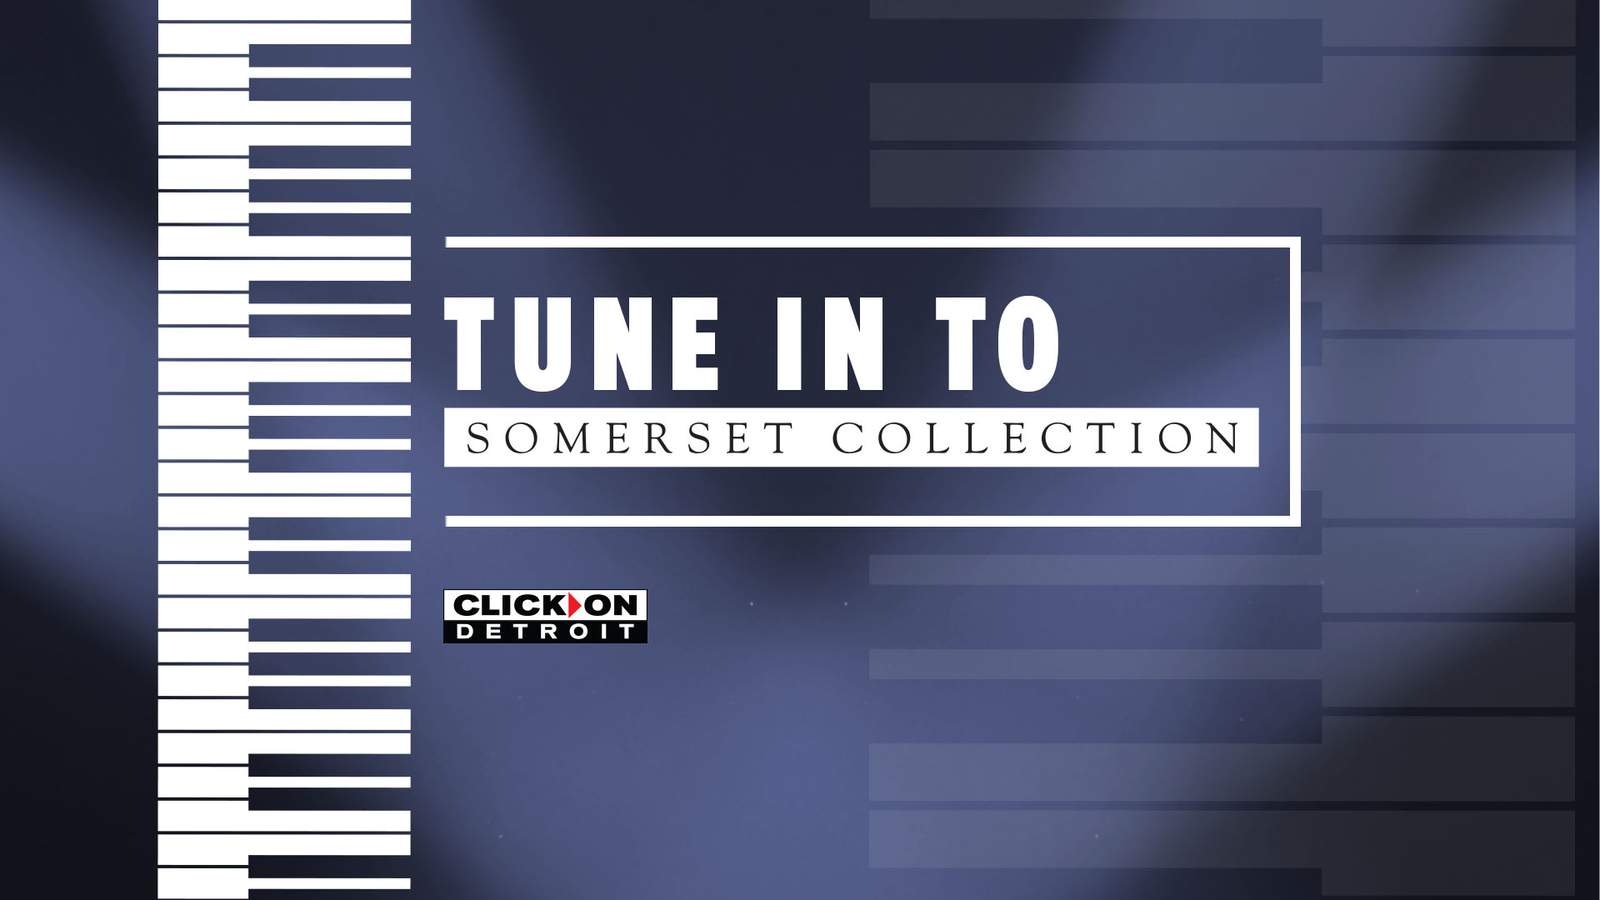 Winners of ‘Tune In To Somerset Collection’ Contest